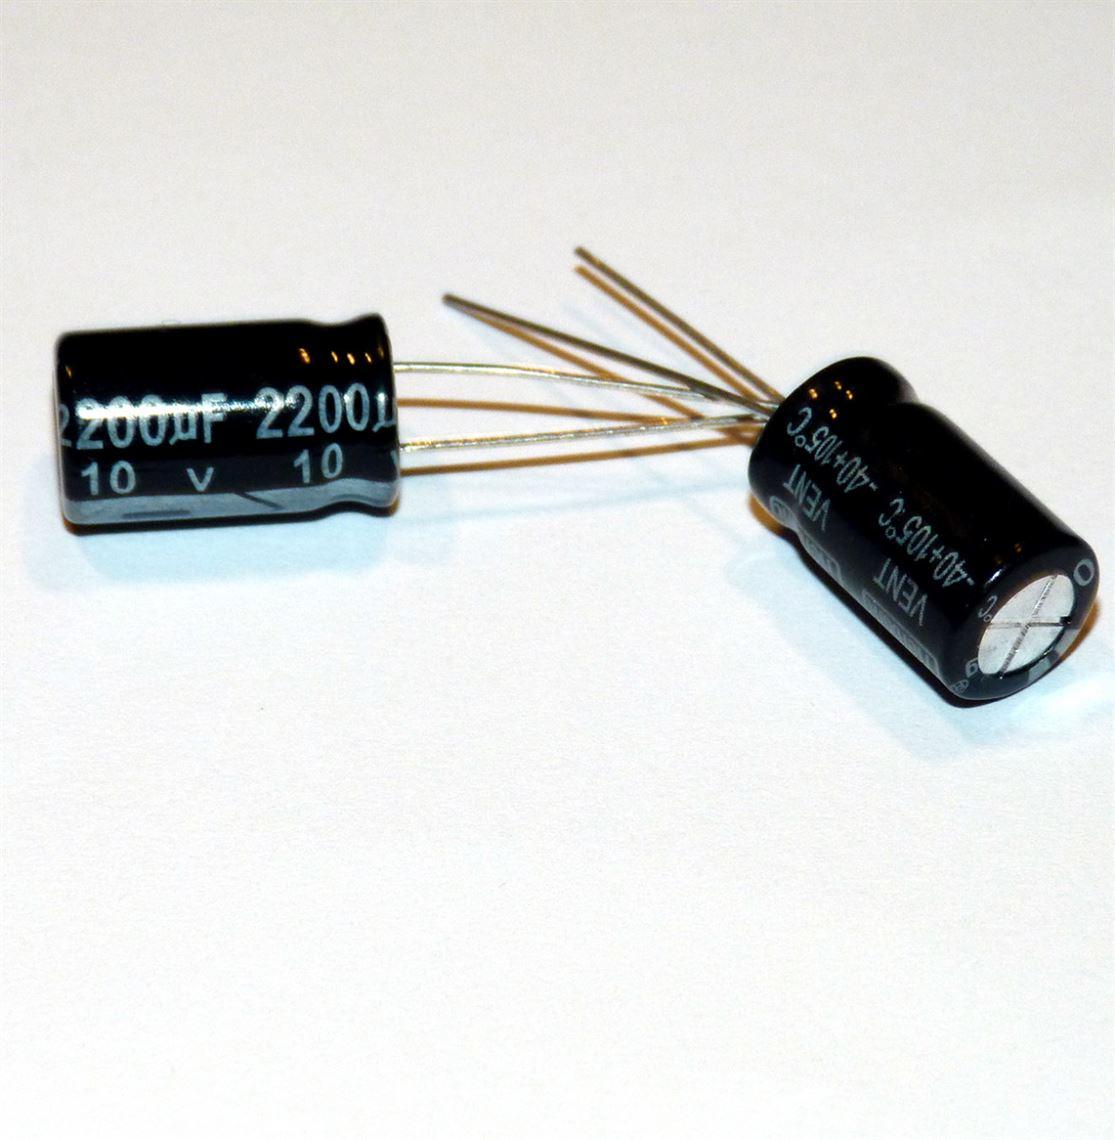 2 x 2200uF 10V Radial Lead Electrolytic Capacitor 10x17 mm - Free Shipping